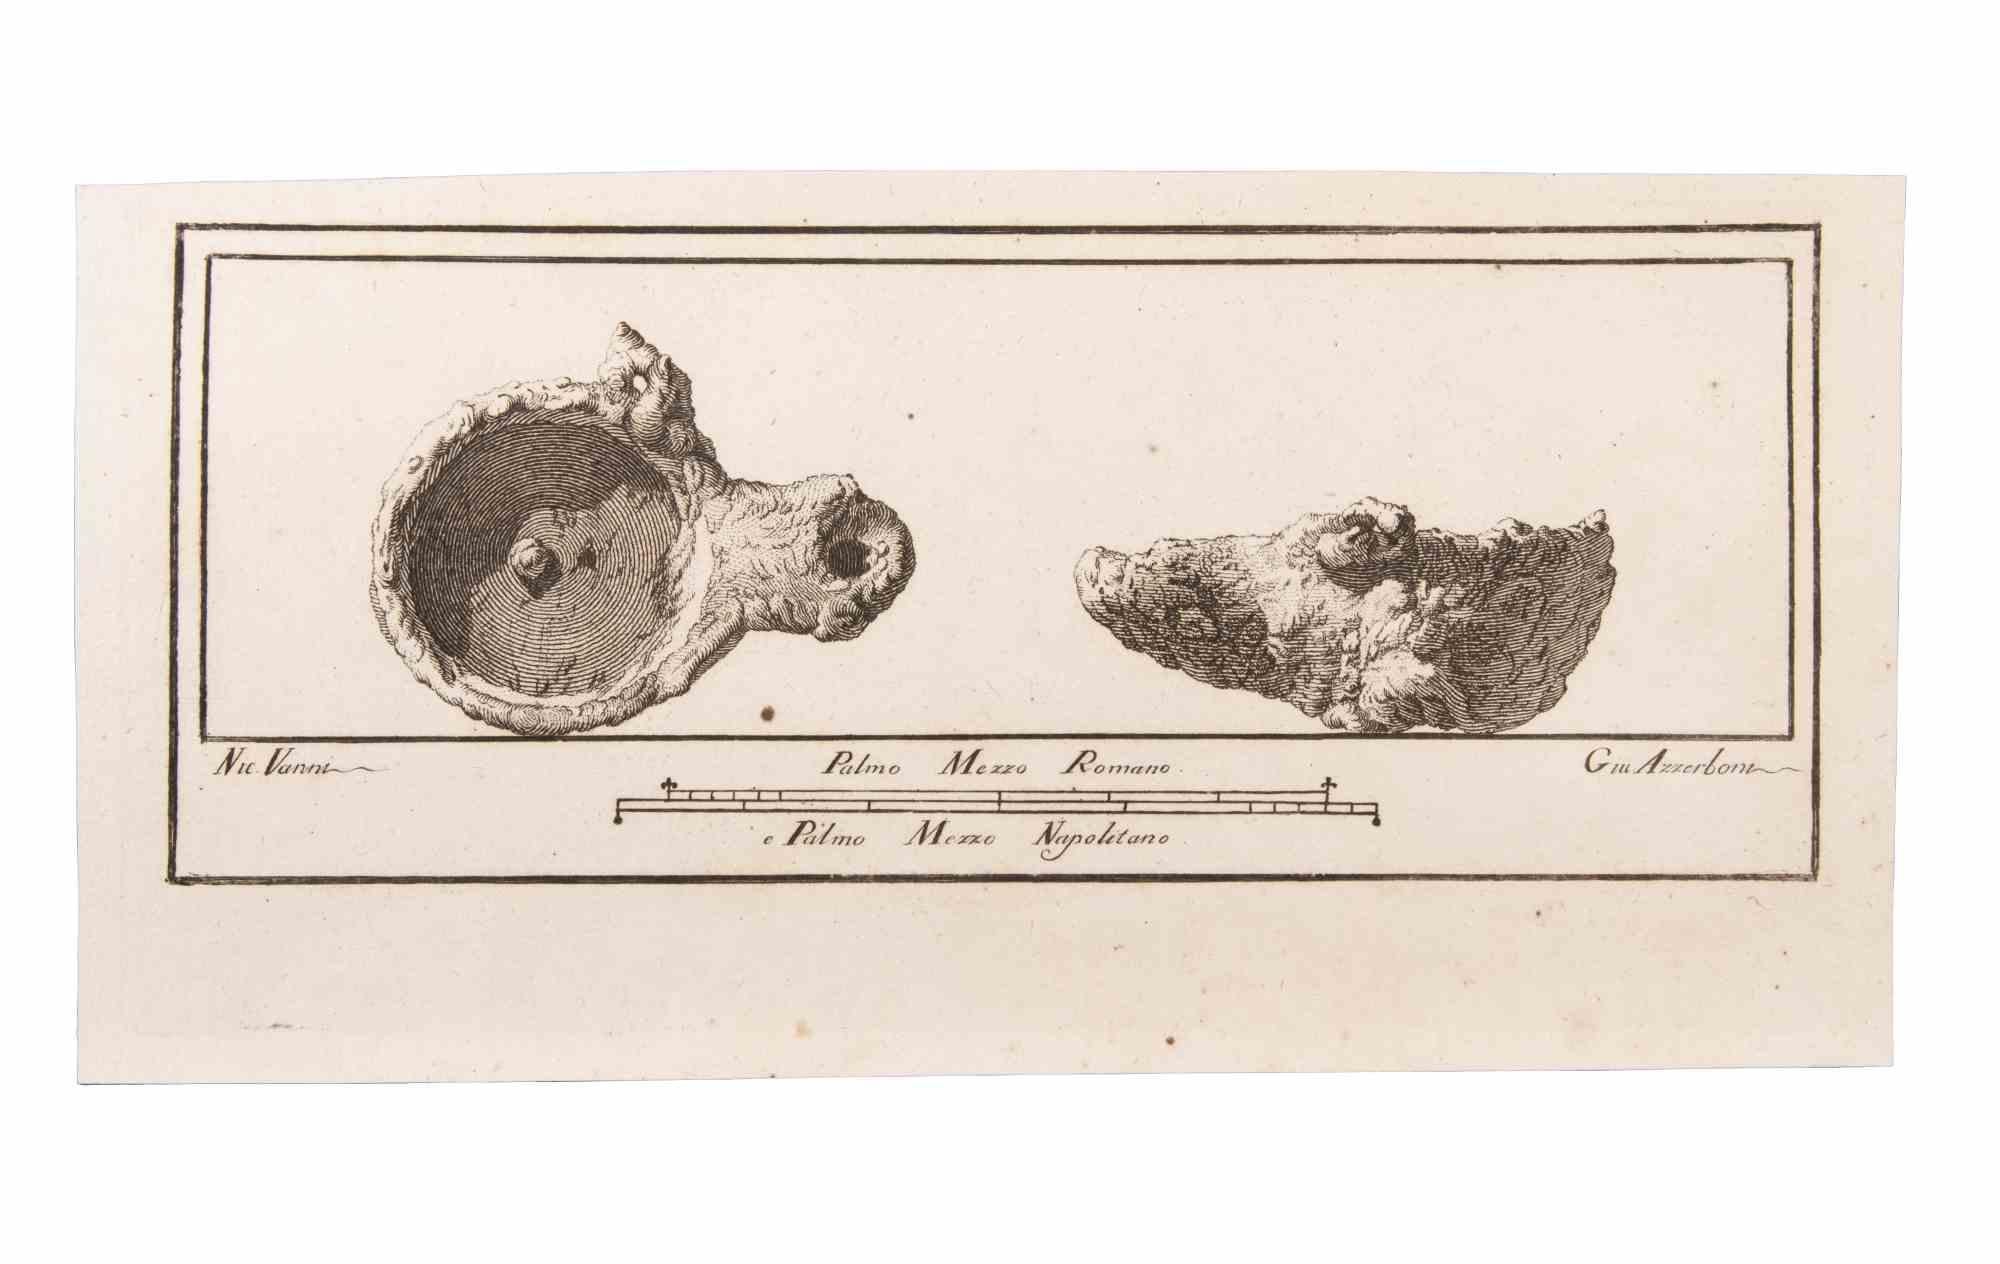 Oil Lamp is an Etching realized by  Niccolò Vanni (1750-1770).

The etching belongs to the print suite “Antiquities of Herculaneum Exposed” (original title: “Le Antichità di Ercolano Esposte”), an eight-volume volume of engravings of the finds from